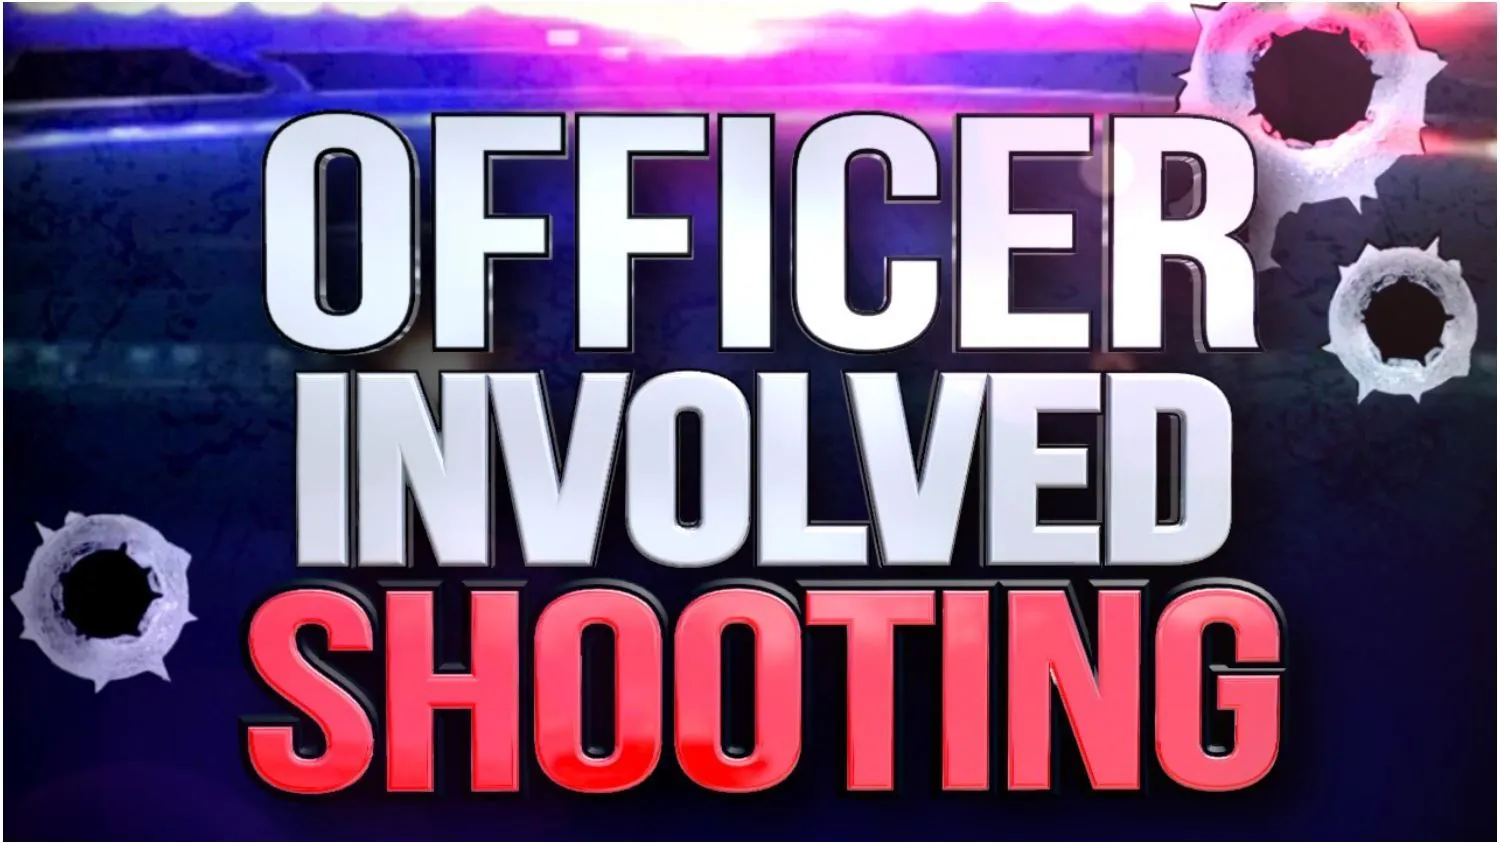 Wichita police shoot possible assailant in domestic incident